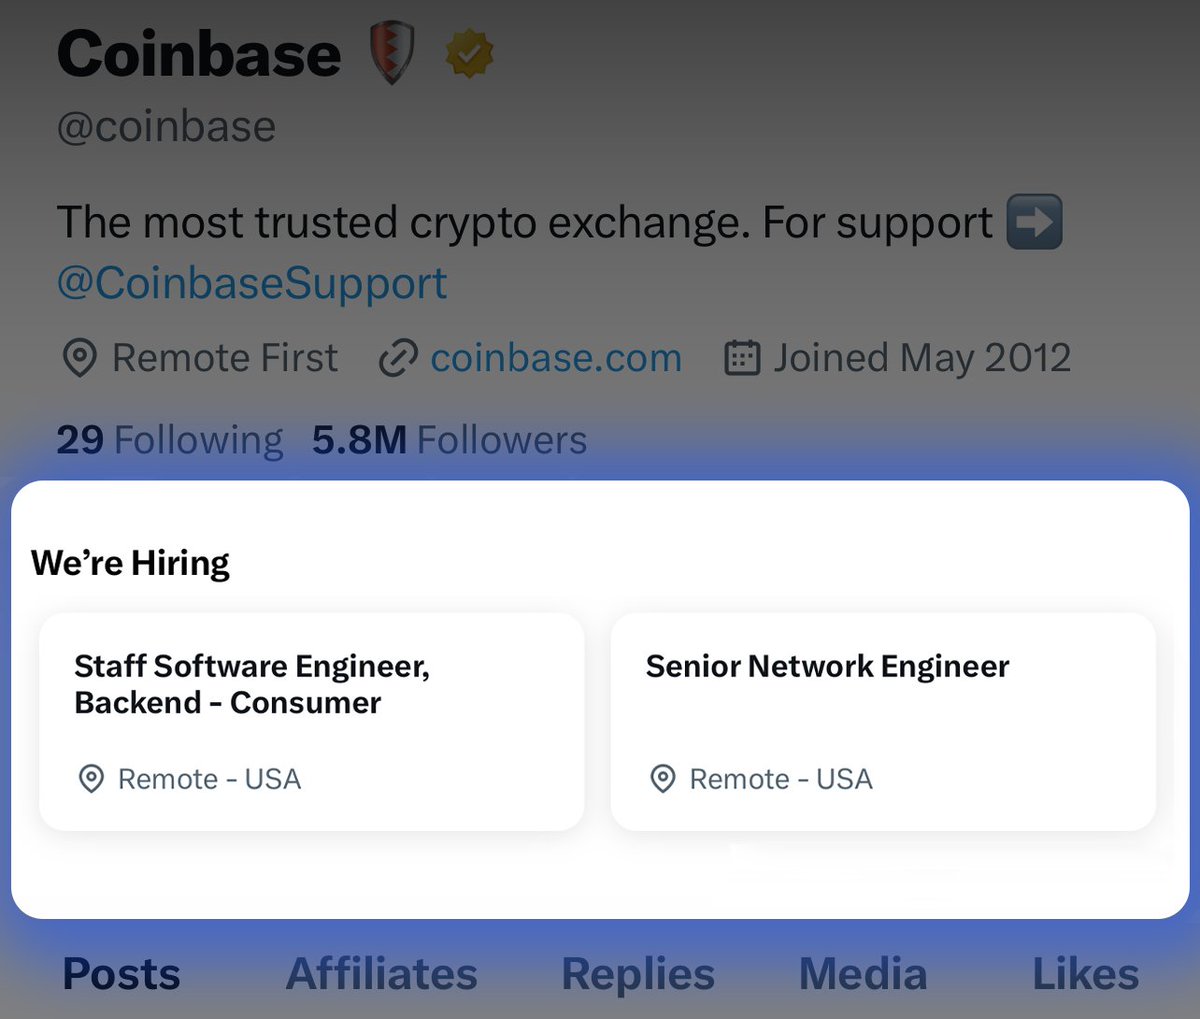 Coinbase is thrilled to partner with @X on the launch of a shiny new hiring feature - directly in our profile. Explore job opportunities while you scroll @X on mobile, desktop, and beyond.  #LiveCrypto #NowHiring